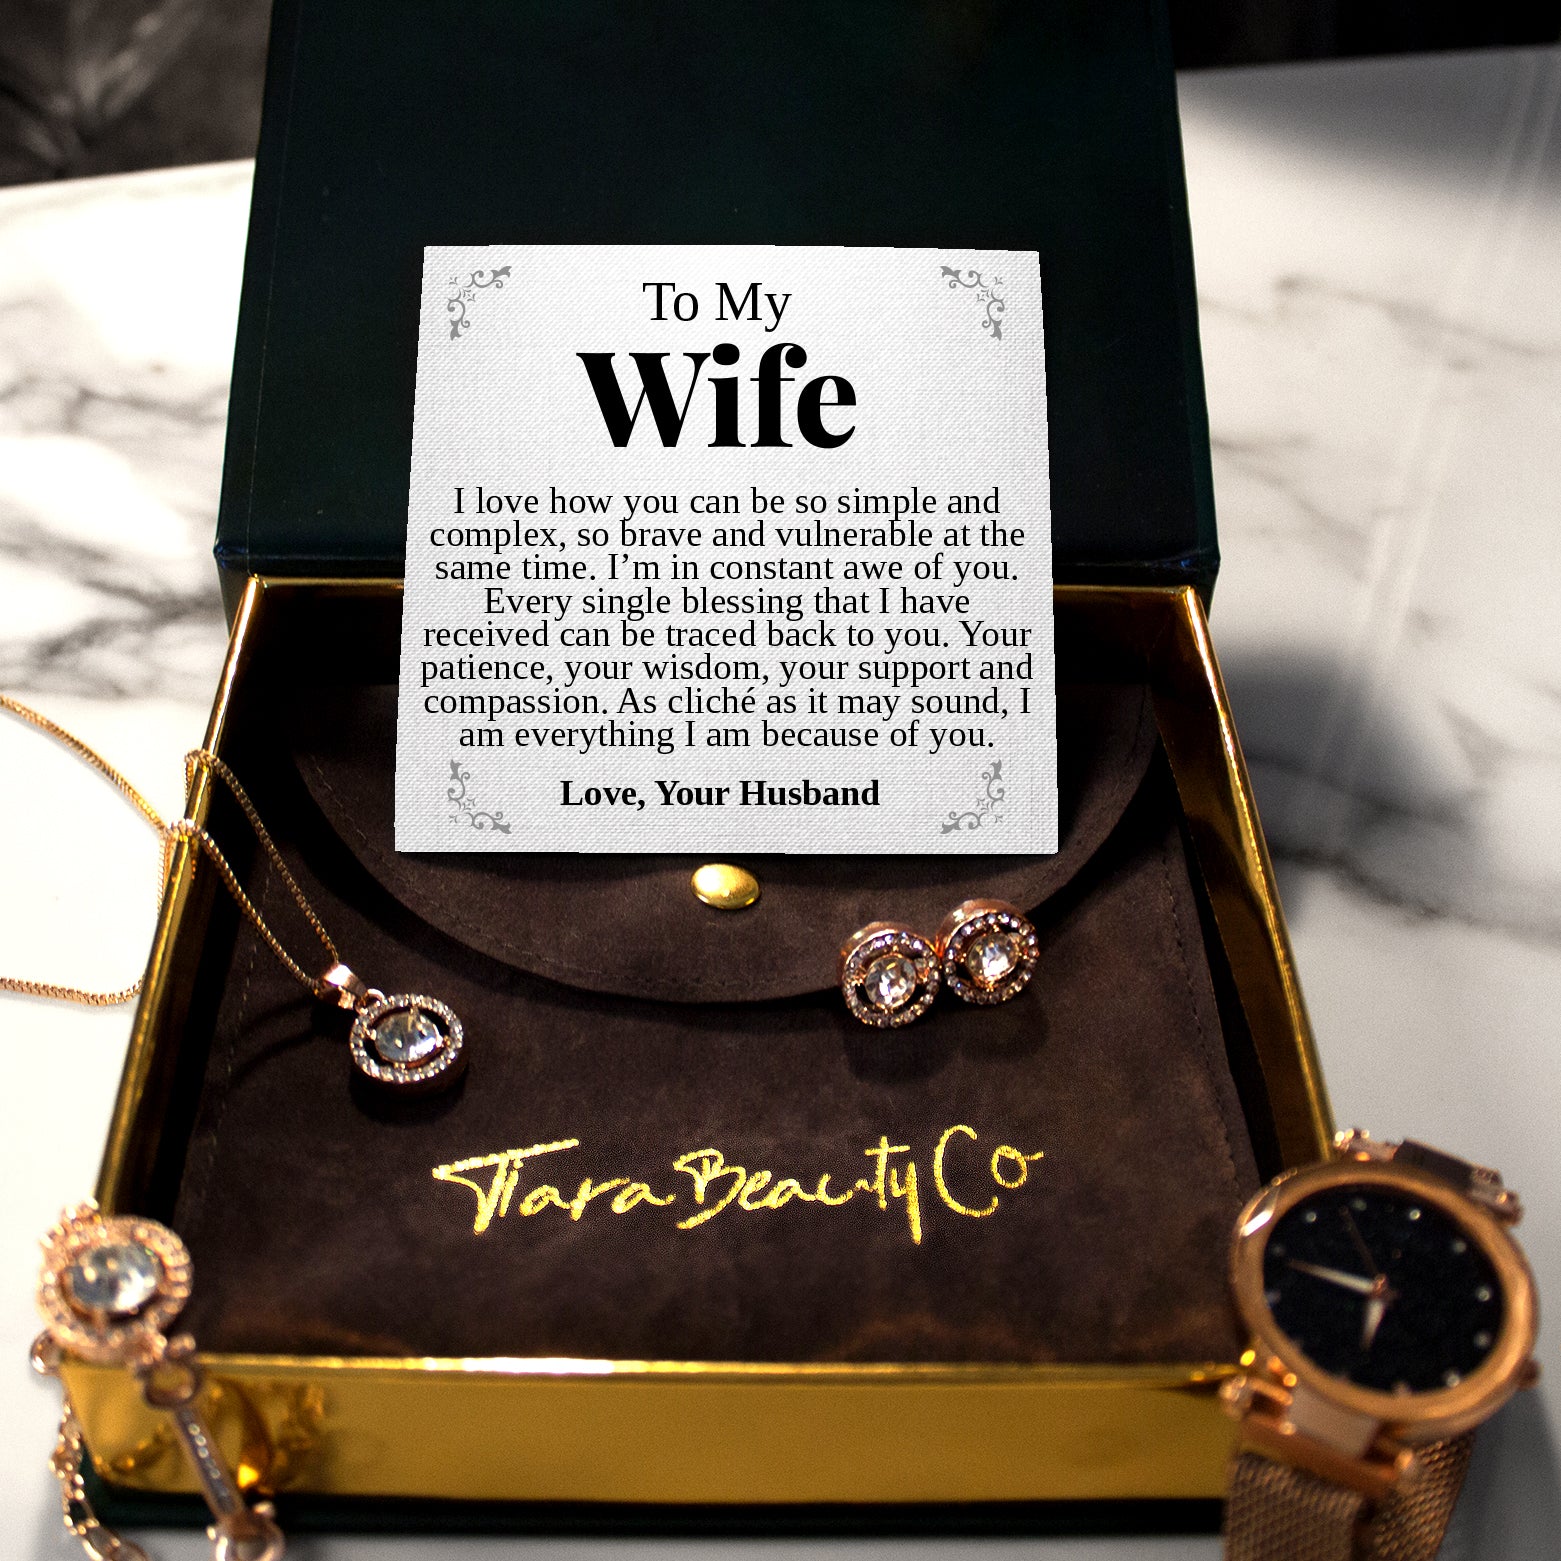 To My Wife | "Everything I Am" | Cosmopolitan Set